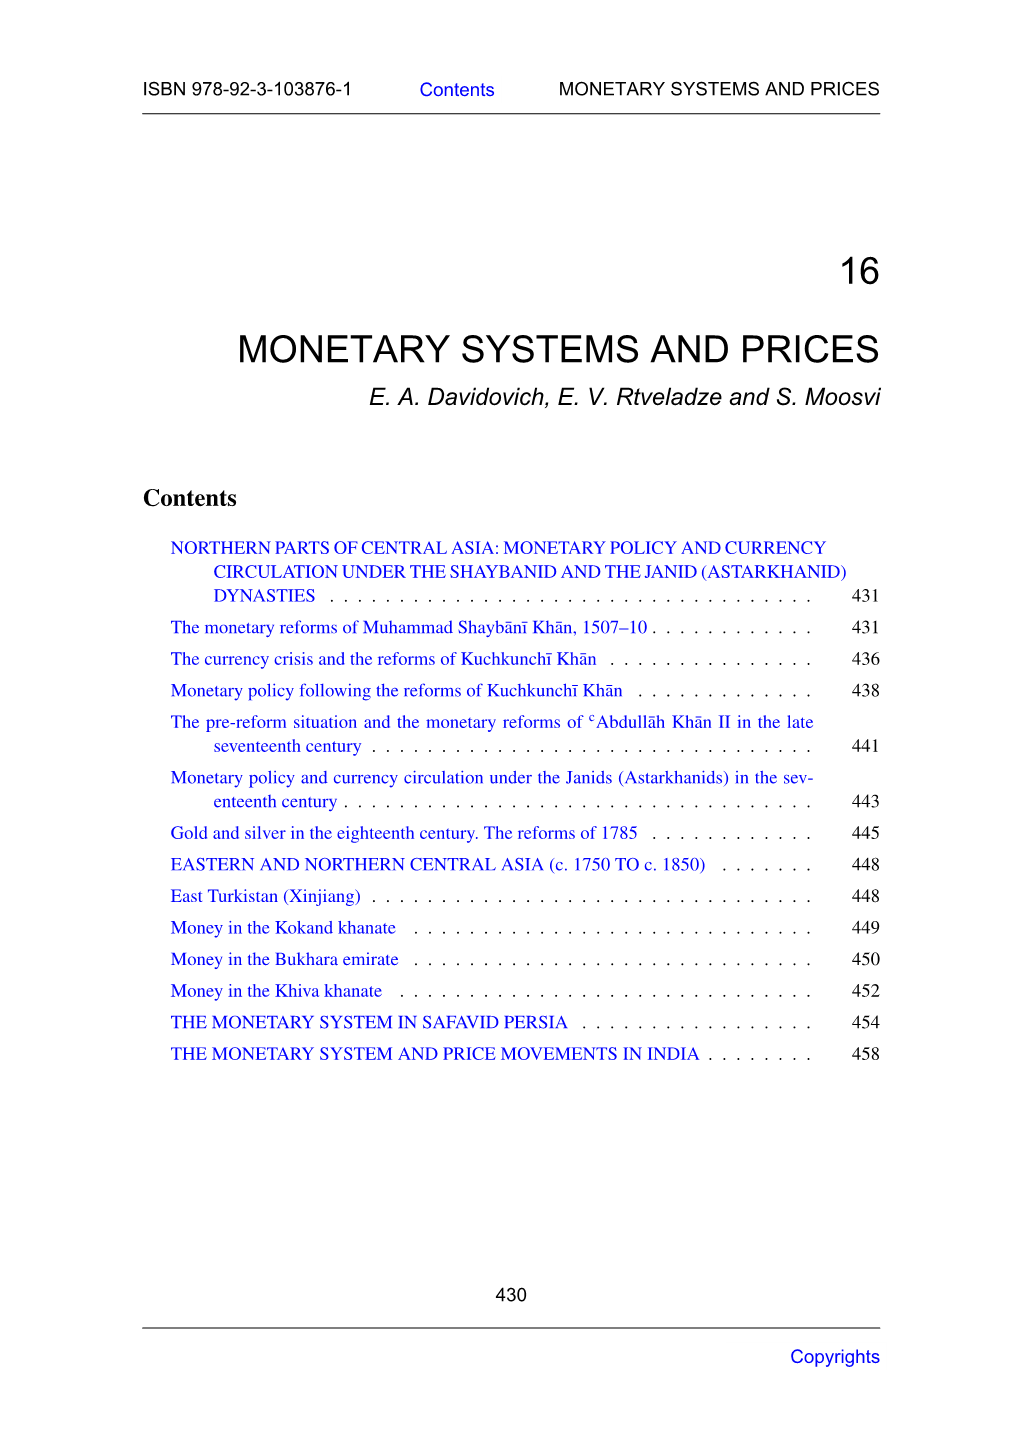 16 Monetary Systems and Prices